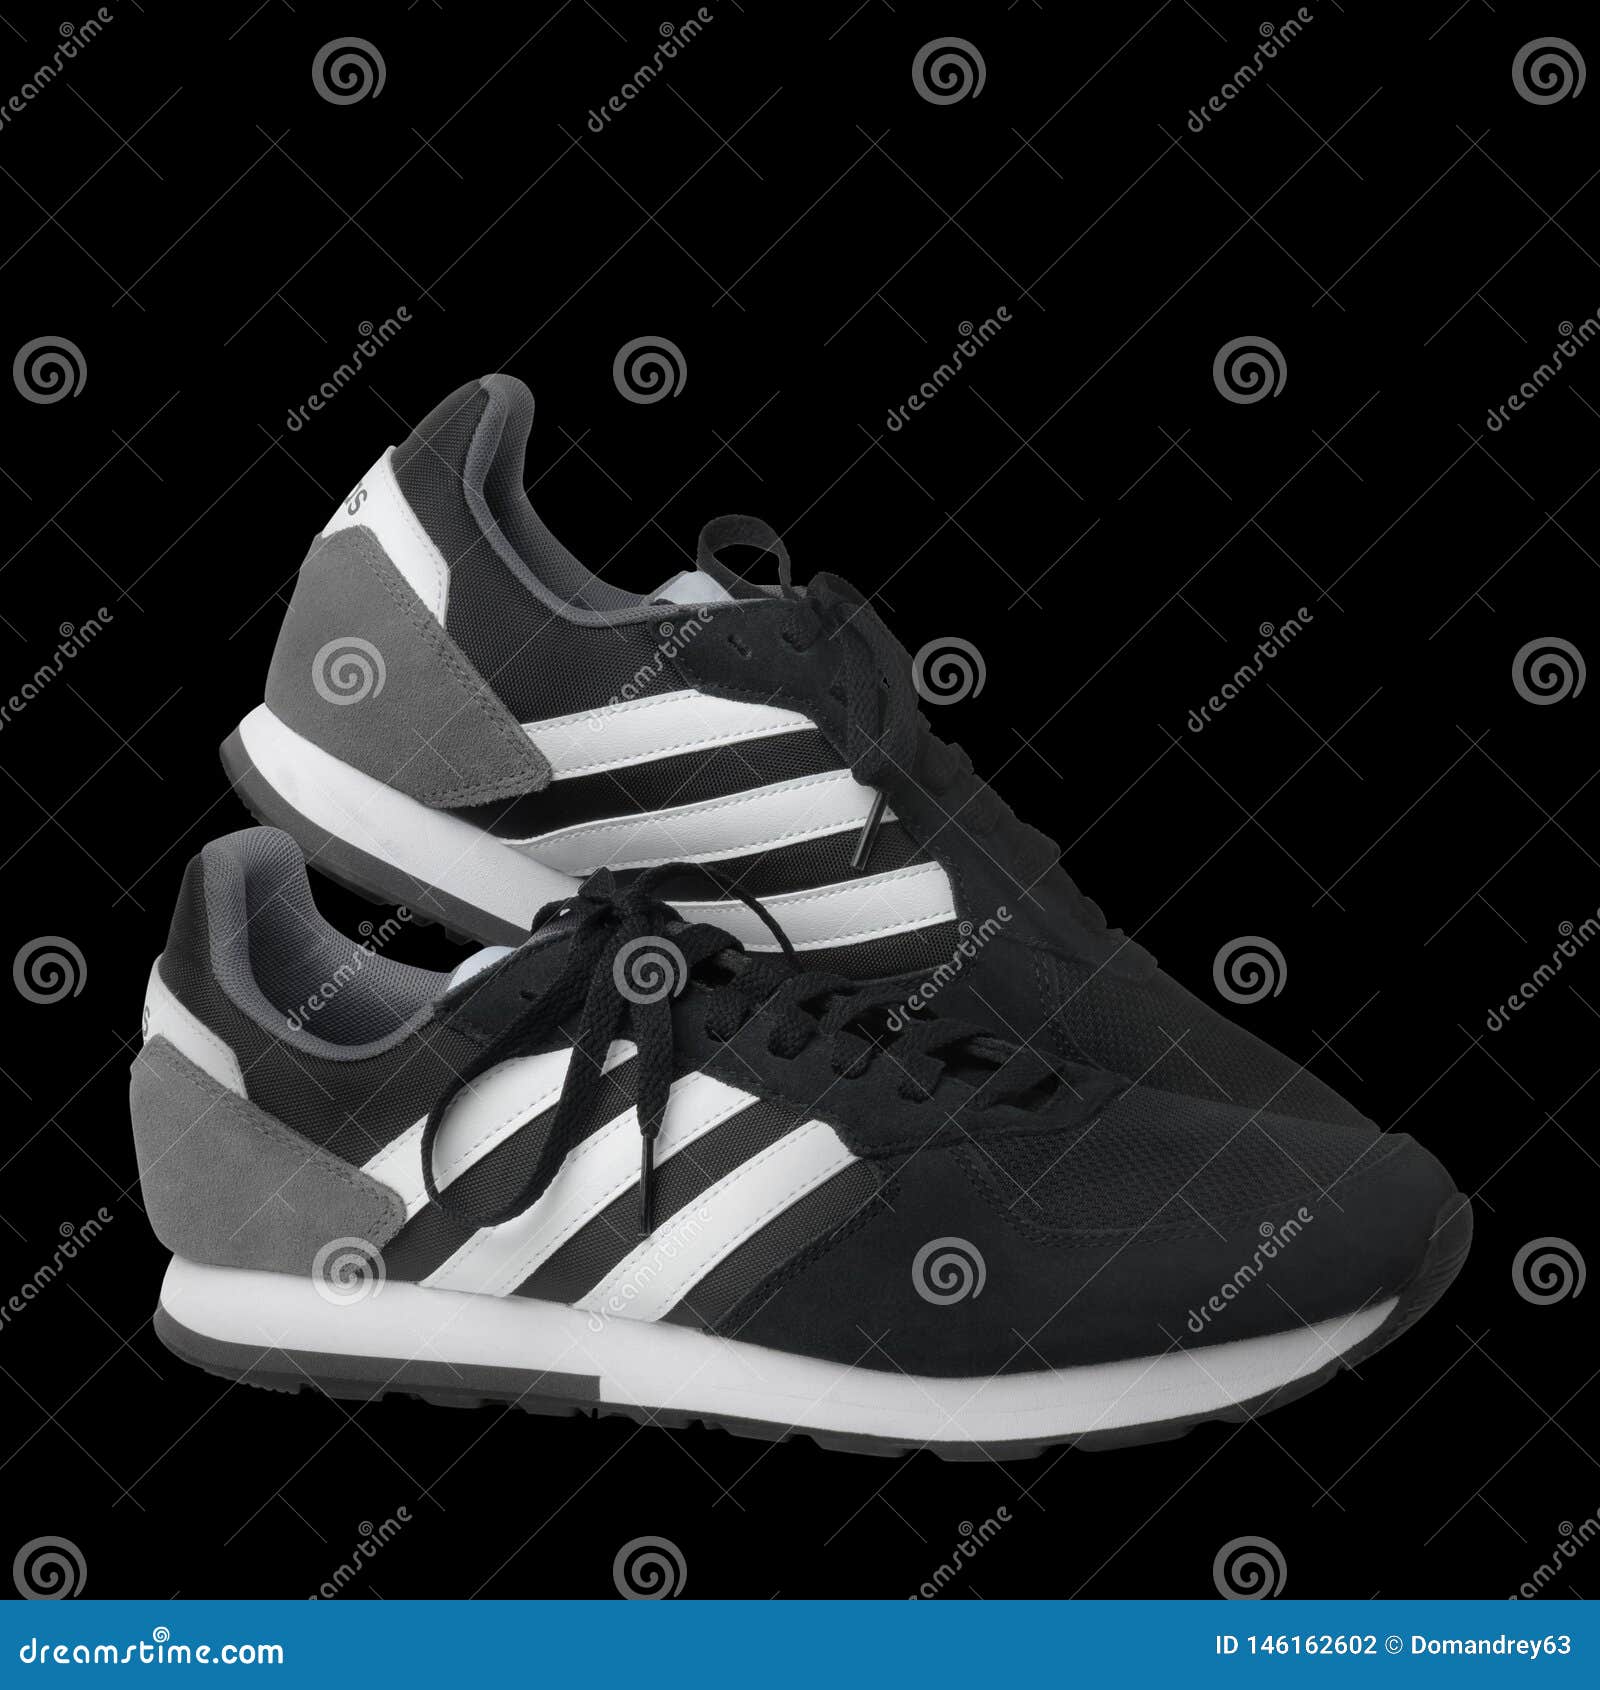 Adidas Sports Shoes Sneakers Black On A White Background Isolated Samara Russia 19 04 13 图库摄影片 图片包括有设计 赞誉